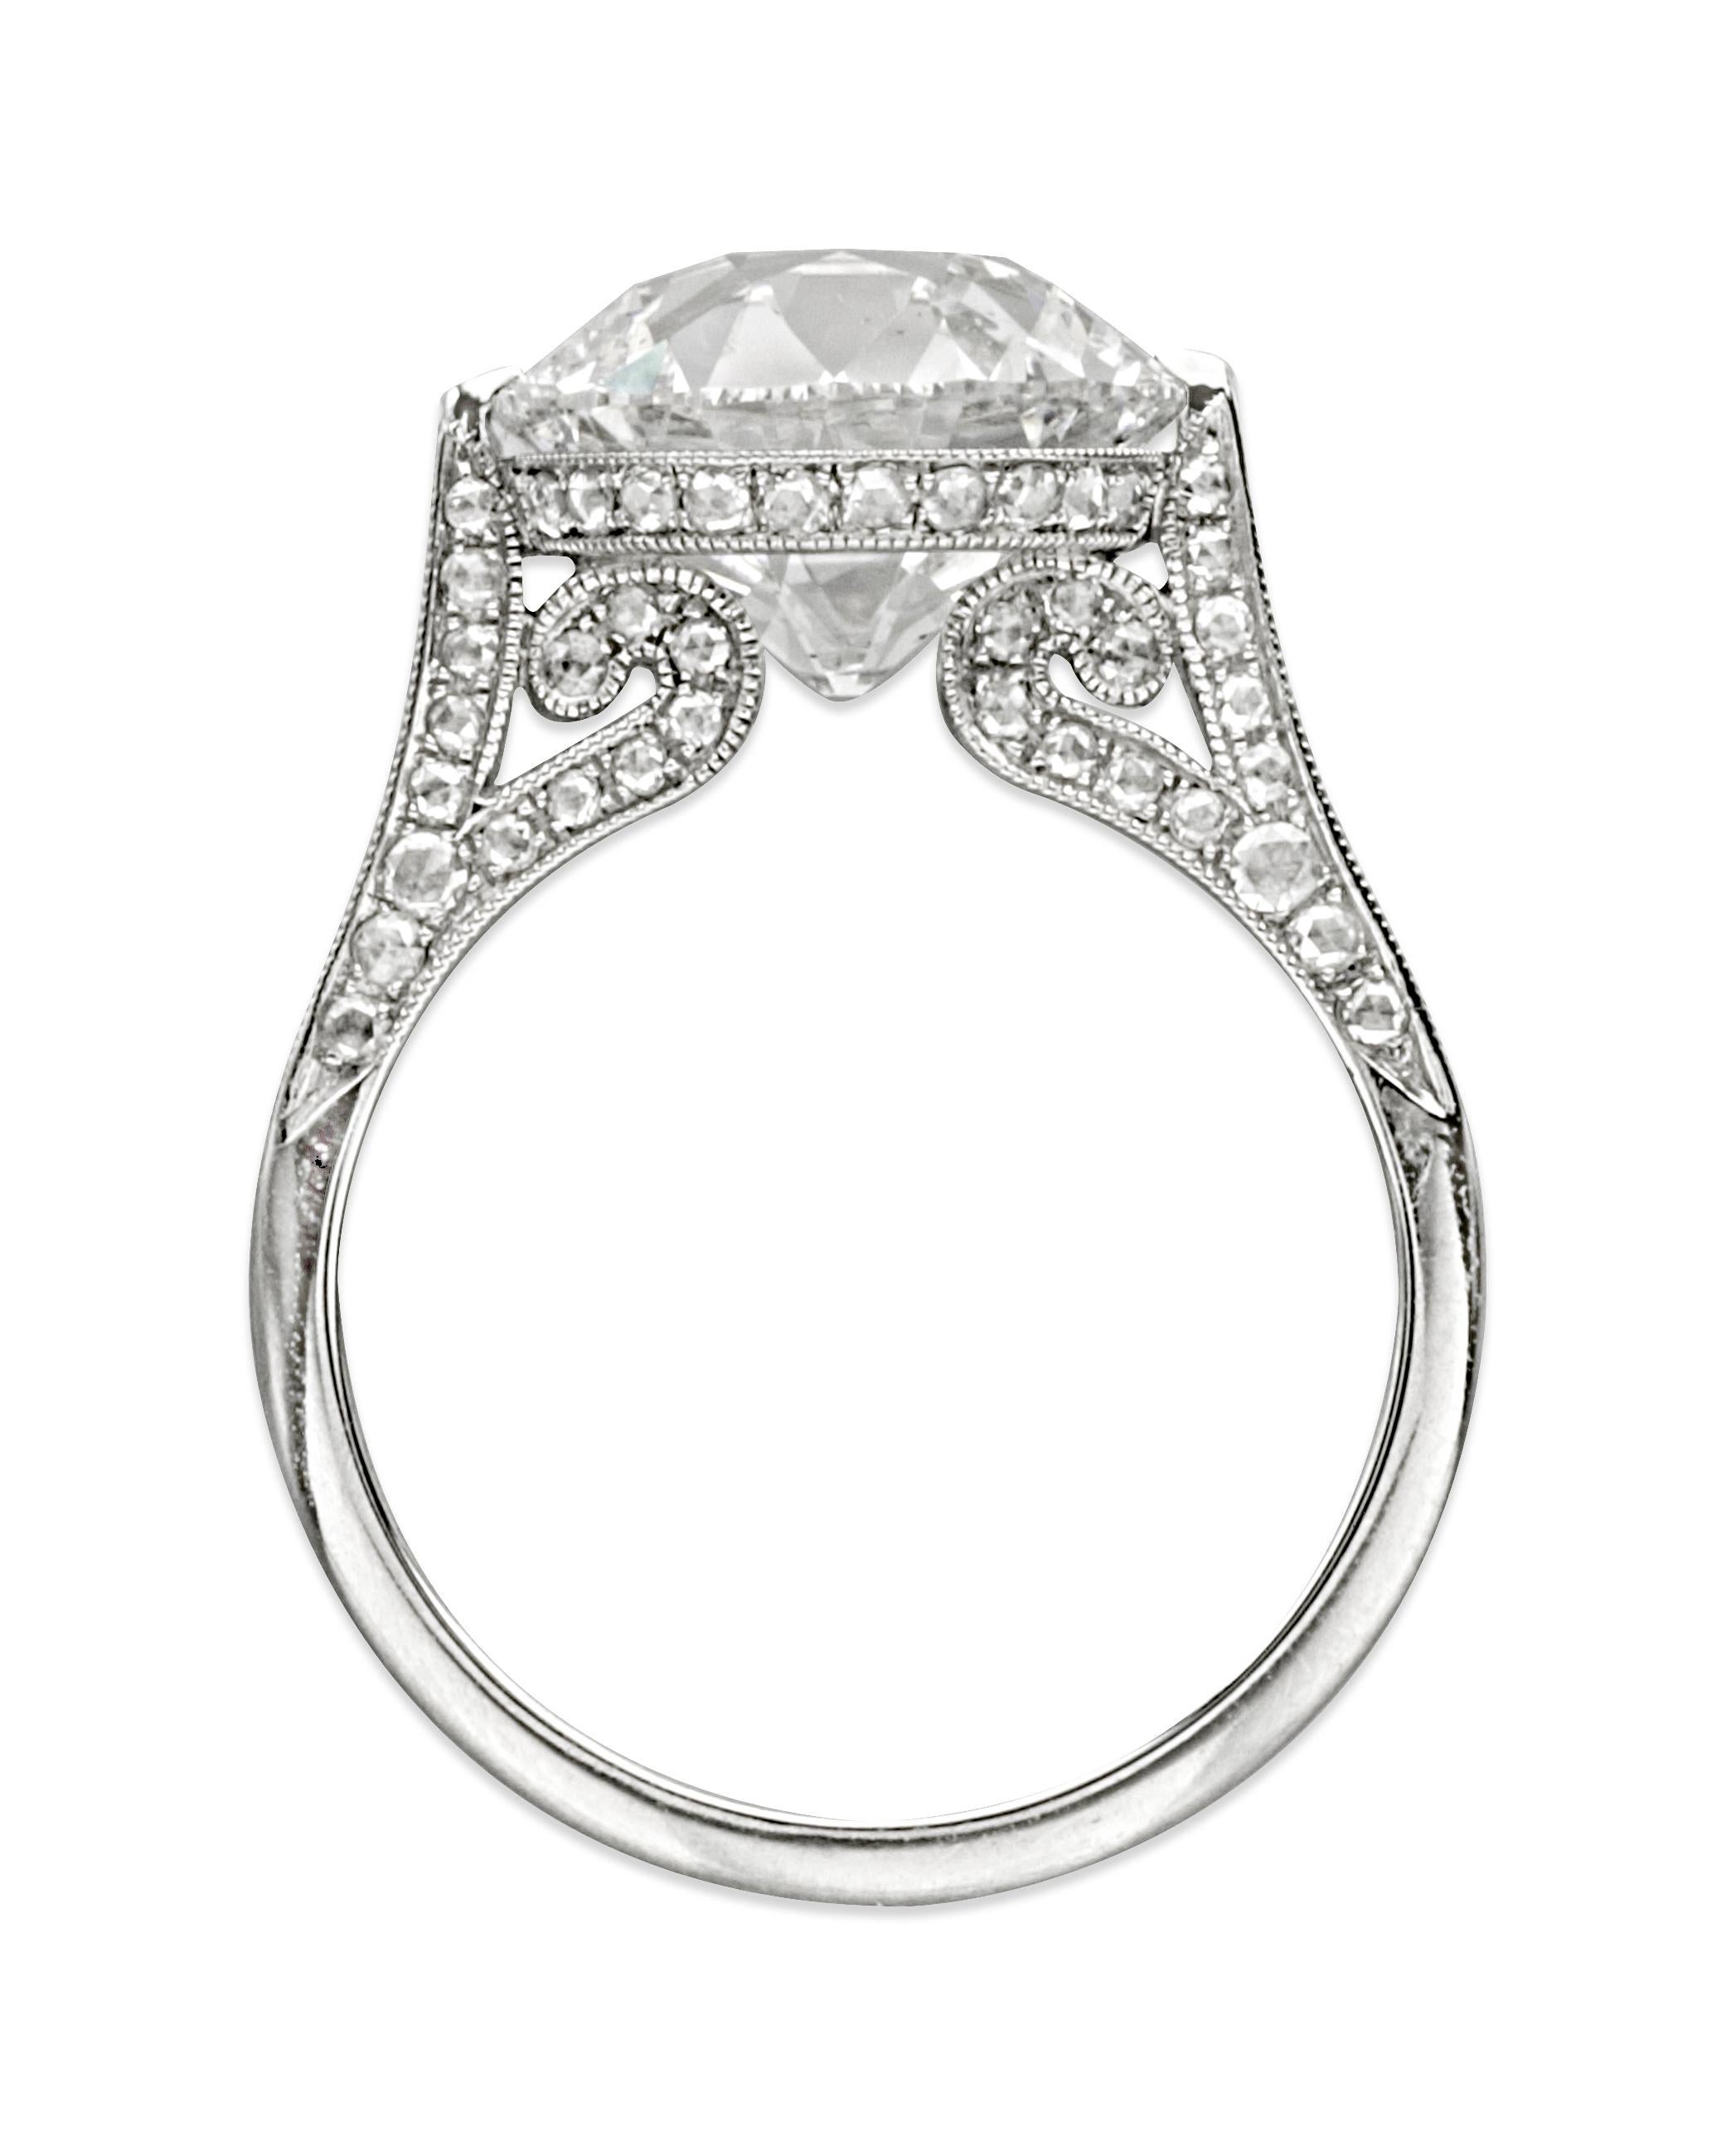 Diamond Ring by Siegelson, New York
Ring inspired by the Belle Epoque; gently sloping shoulders and scroll-shaped supports embellished with round and millegrain borders centering an old European-cut diamond; mounted in platinum
• 1 old European-cut